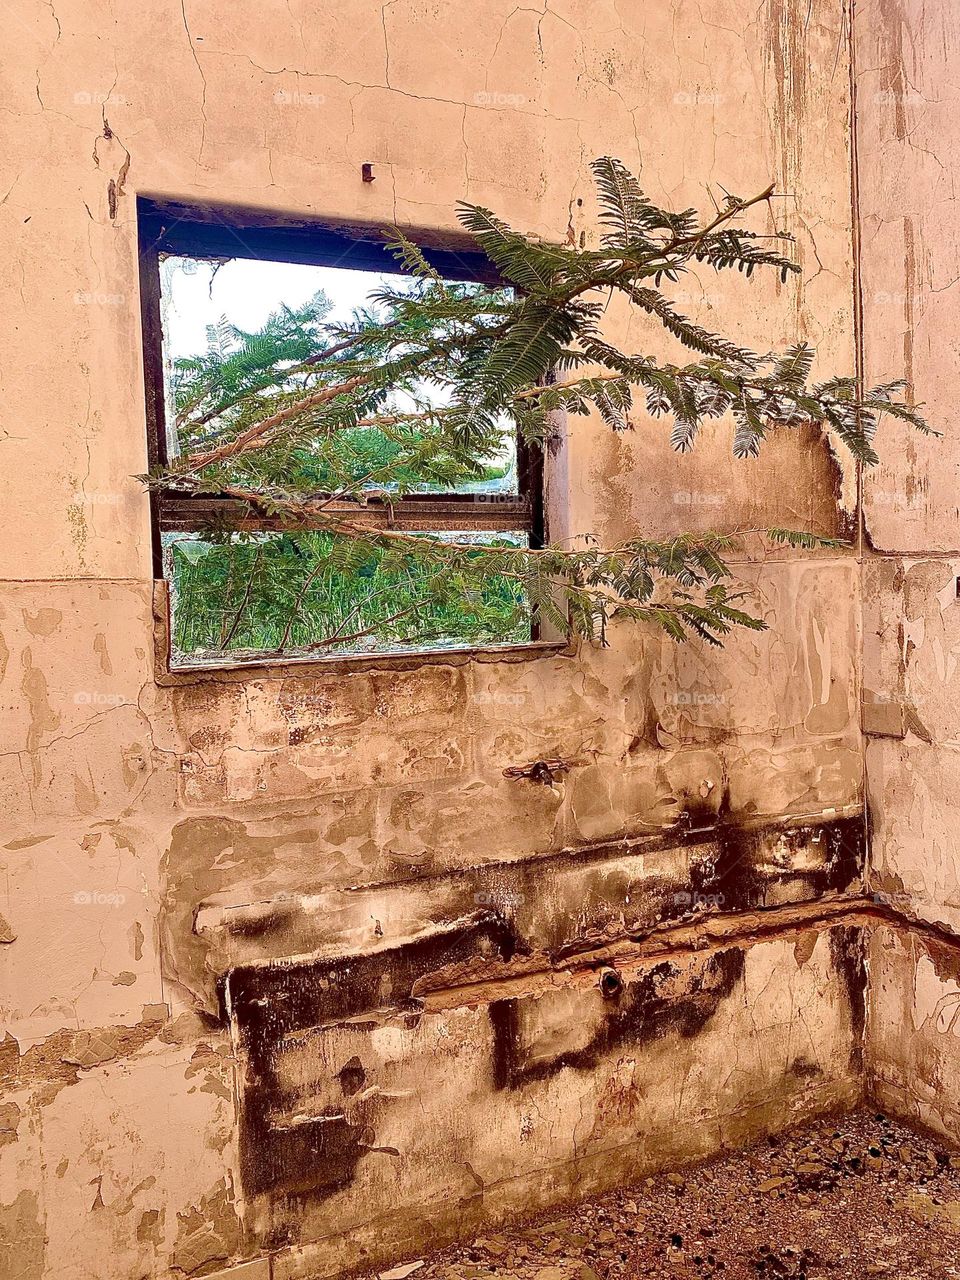 Tree growing through burned down house